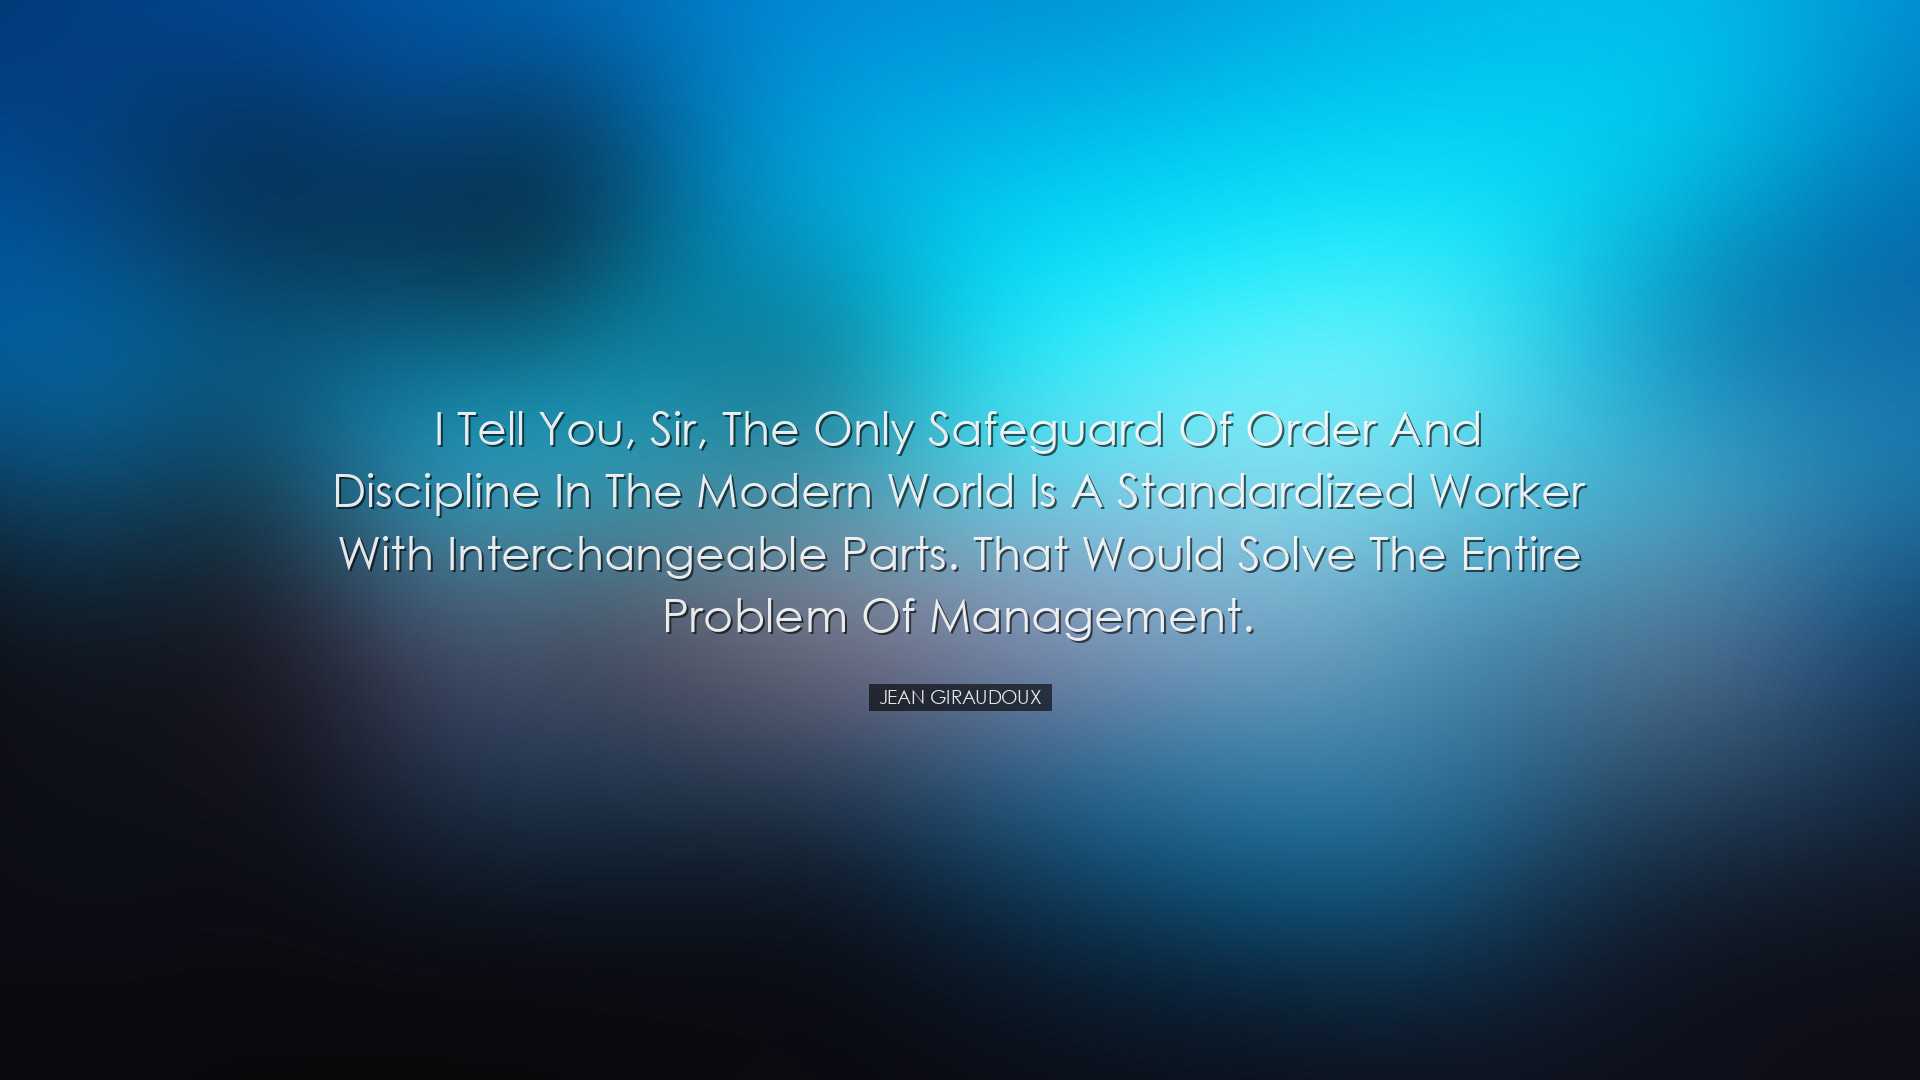 I tell you, sir, the only safeguard of order and discipline in the